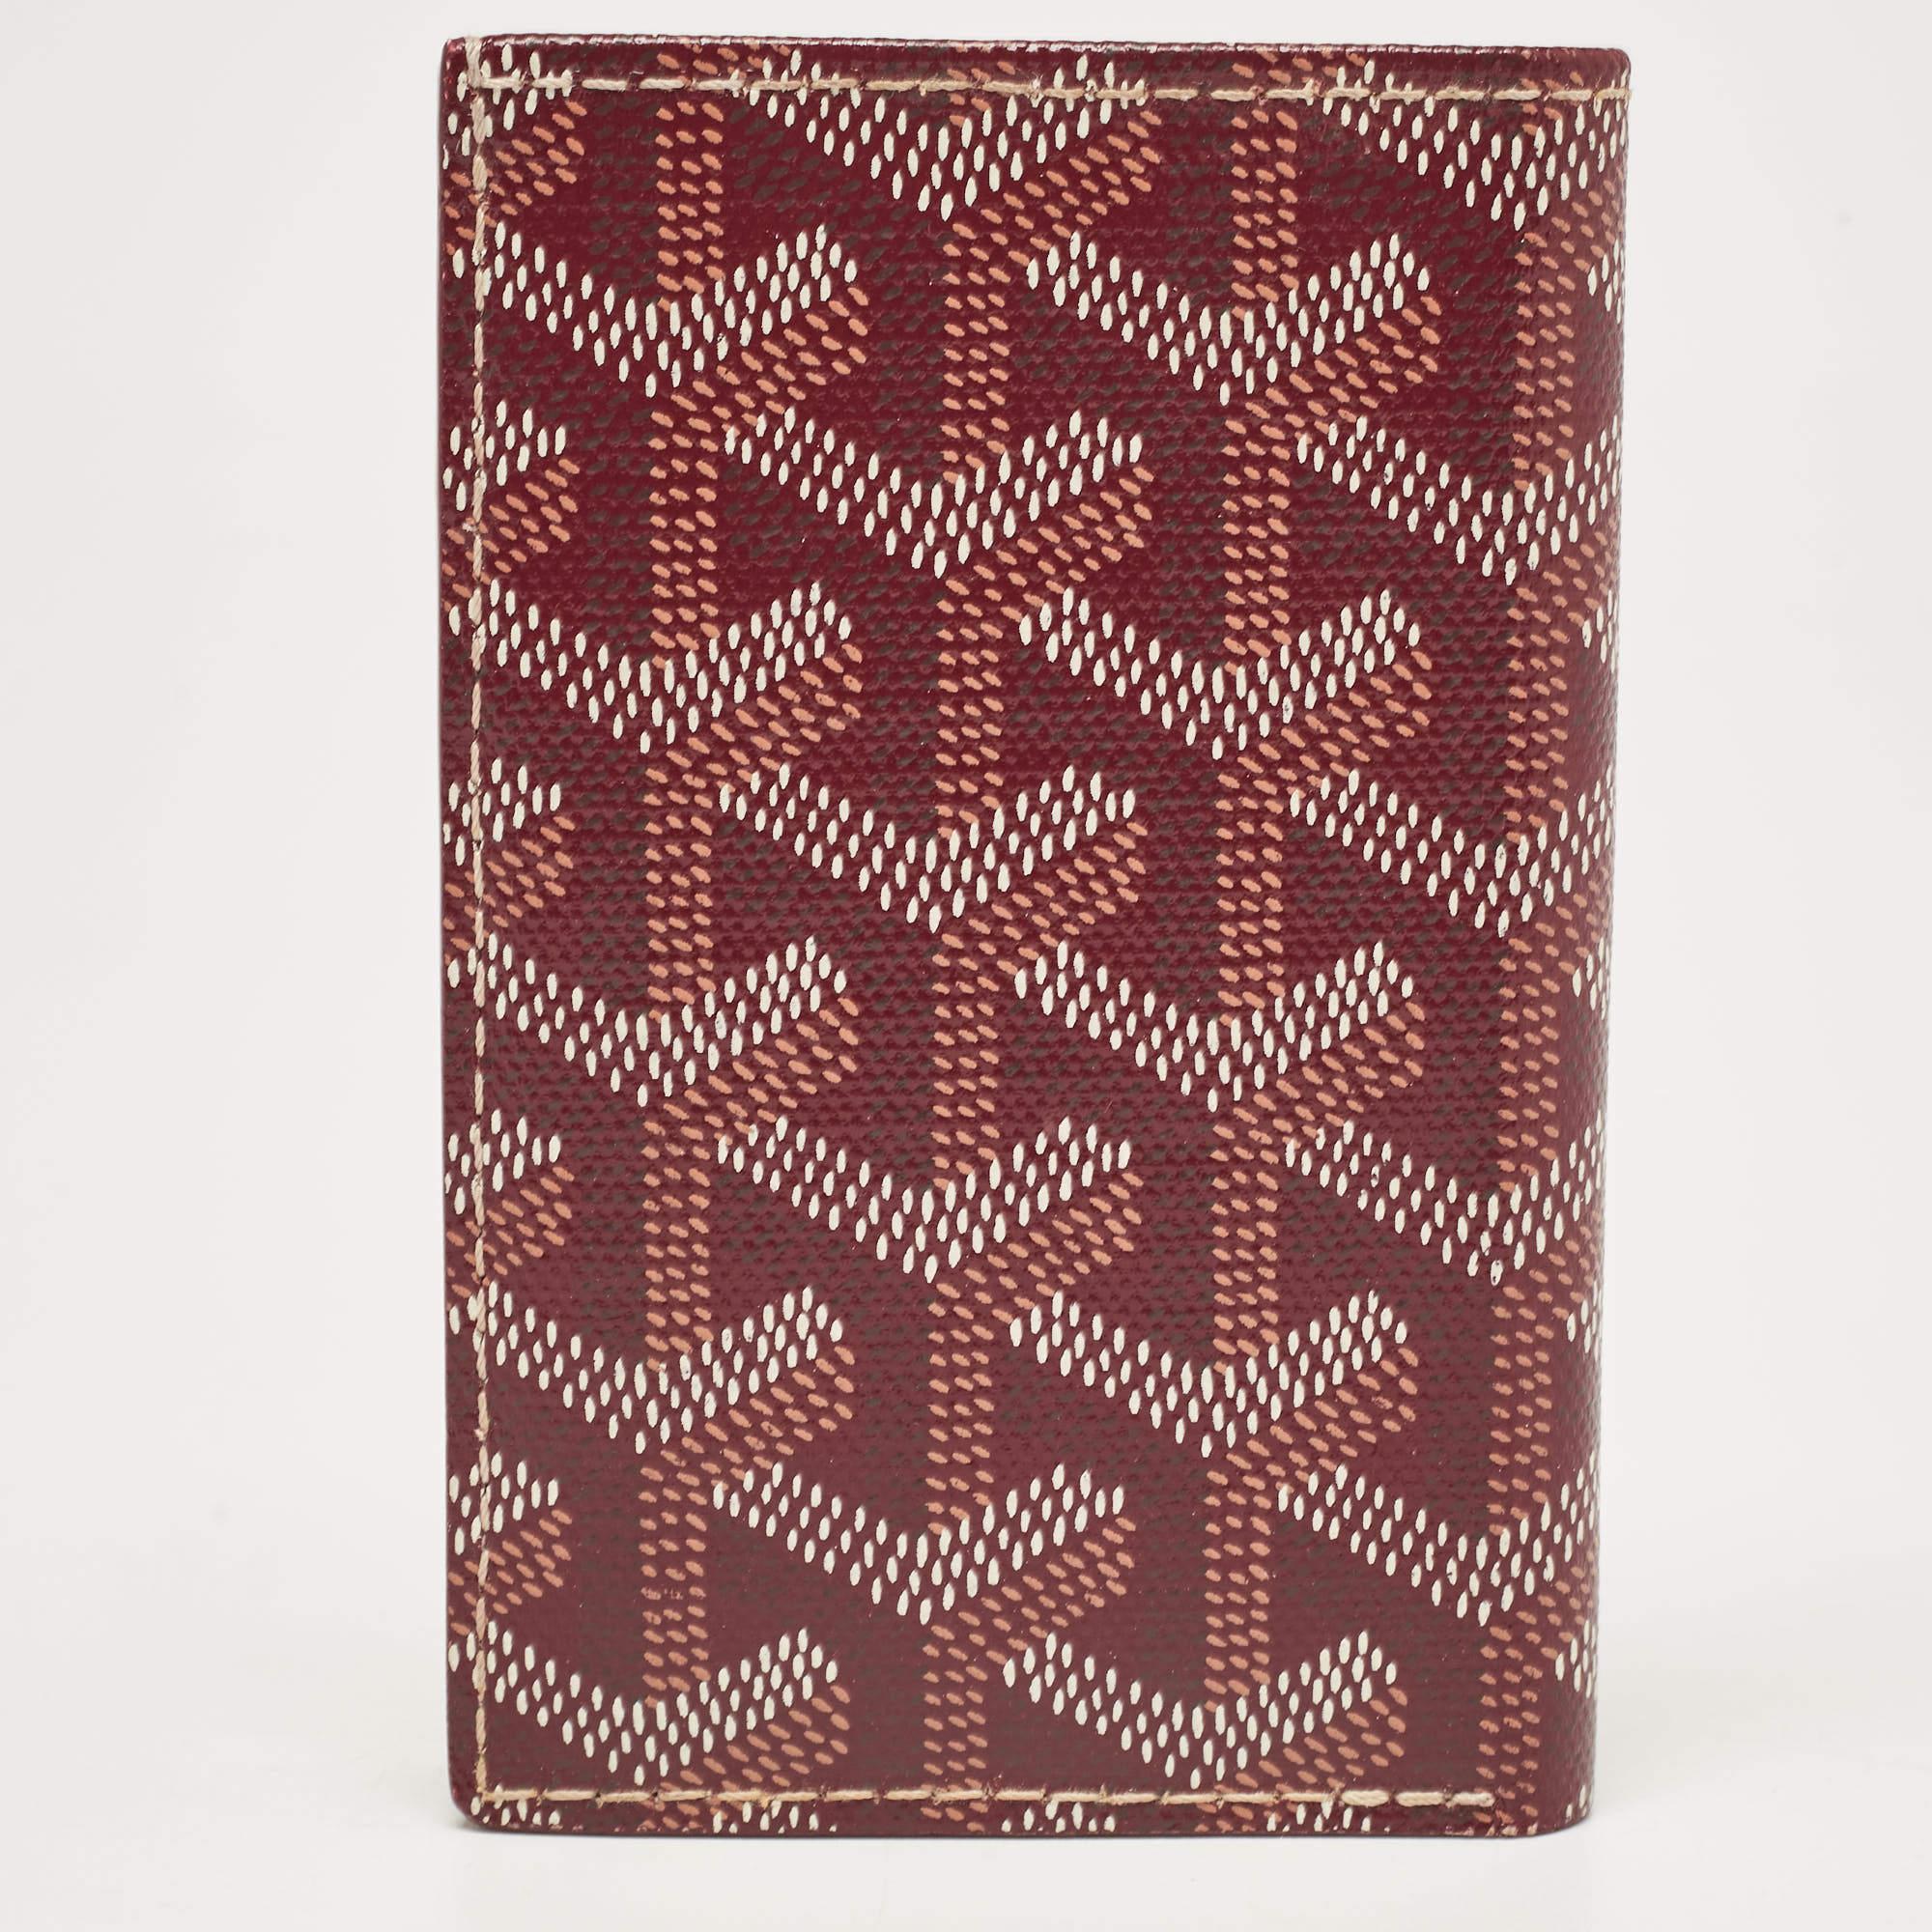 Functional and stylish, this Saint Pierre cardholder from Goyard should be your next buy. Crafted from signature Goyardine coated canvas, this burgundy cardholder features a bifold silhouette with multiple card slots lined in leather. It can be